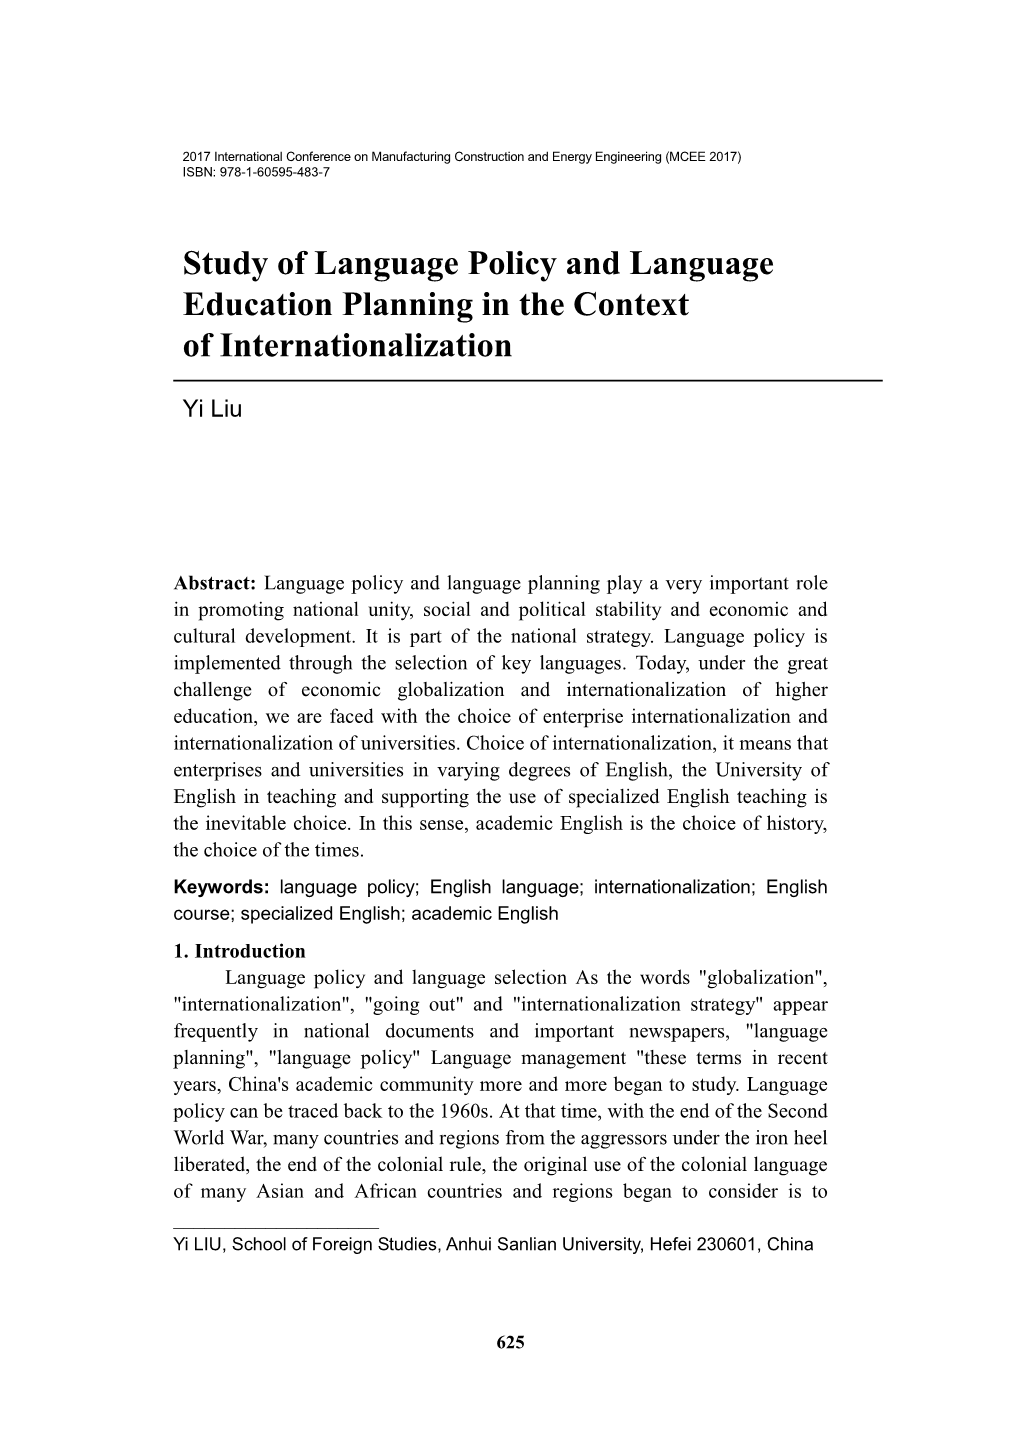 Study of Language Policy and Language Education Planning in the Context